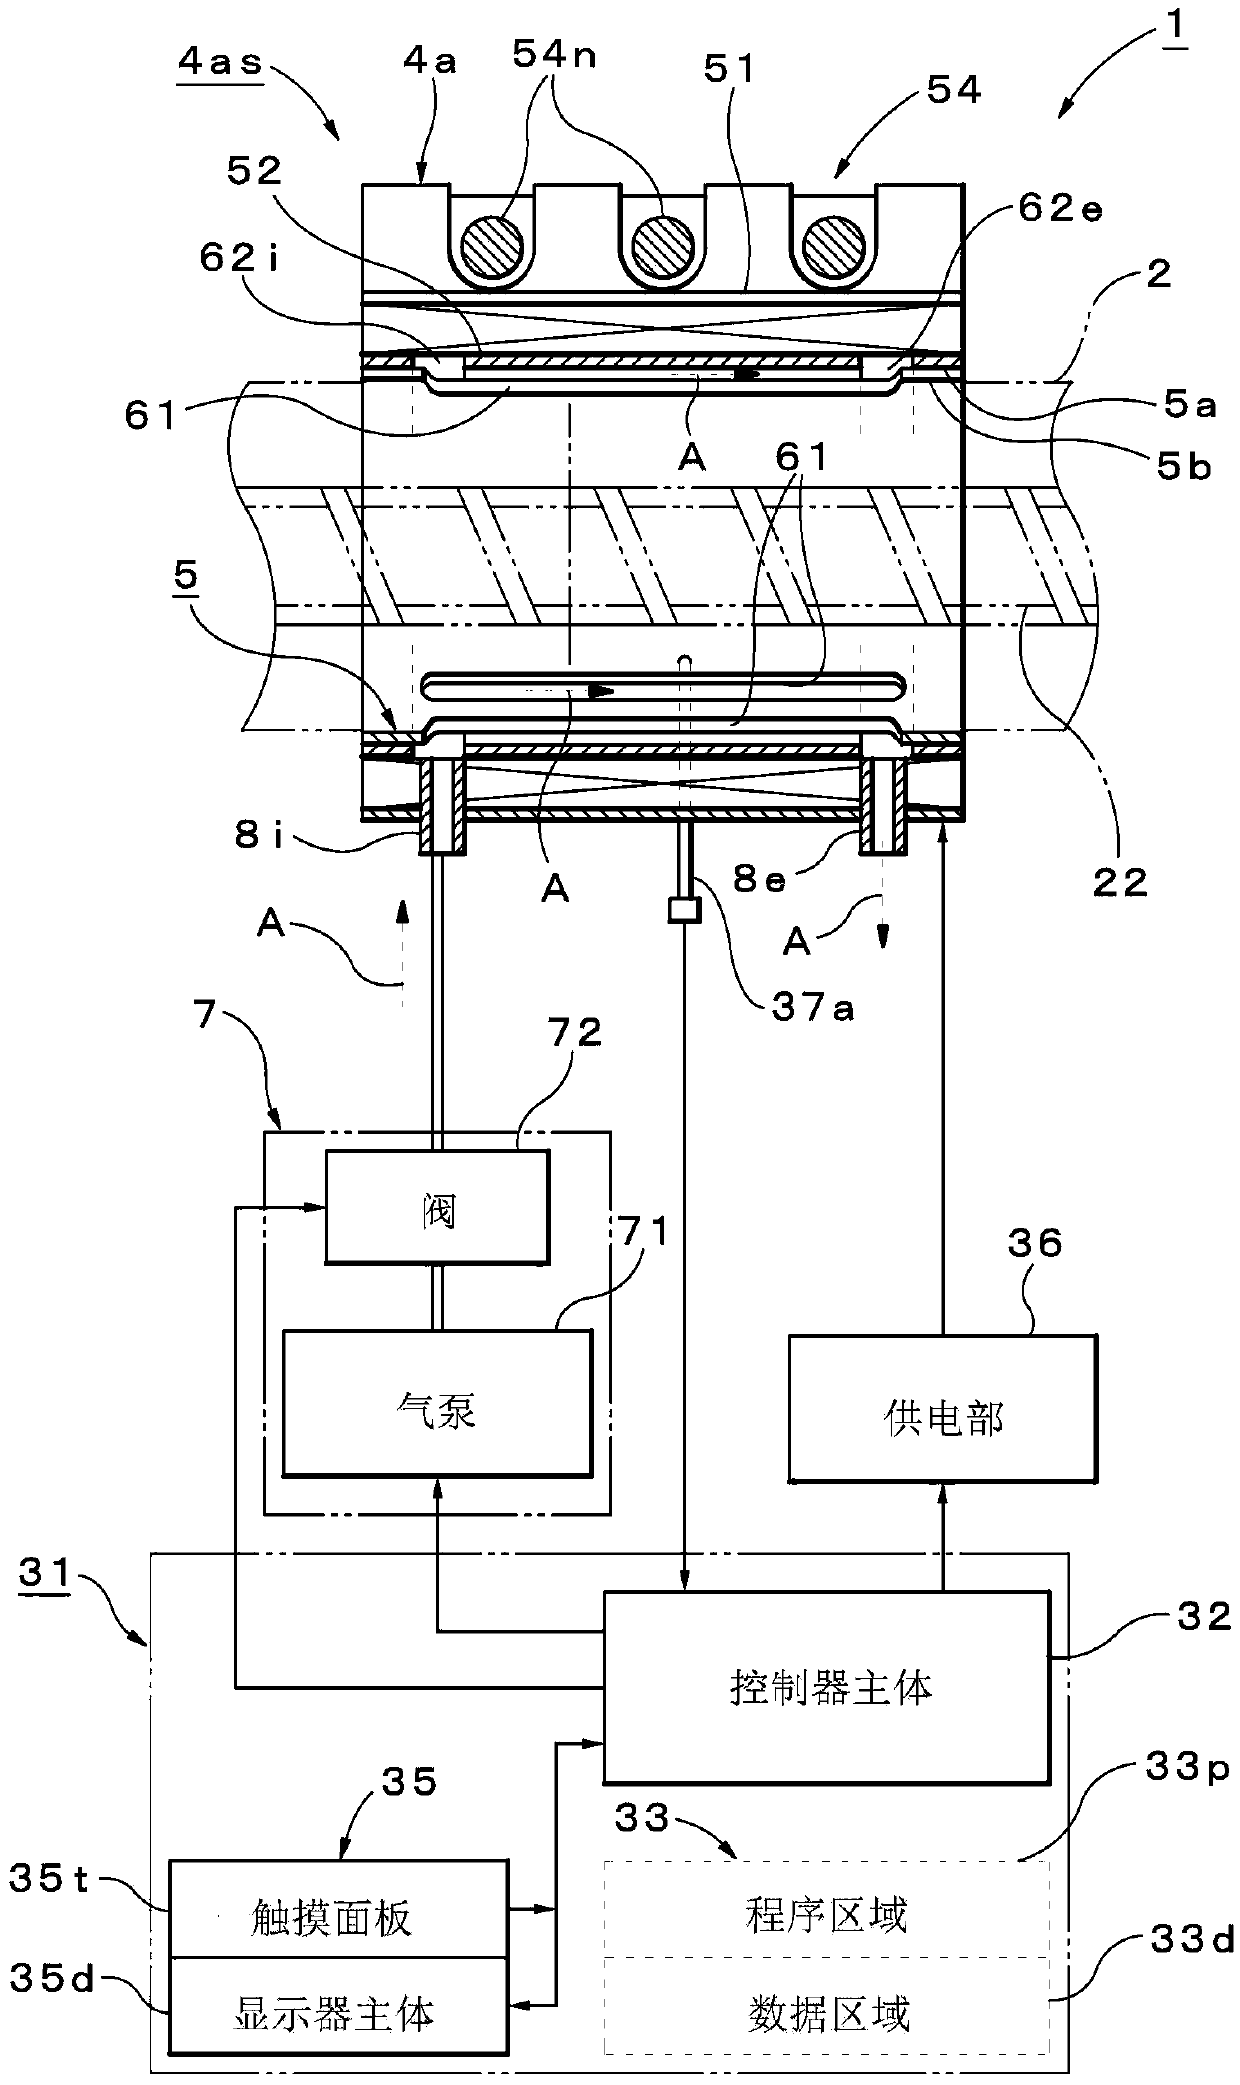 Heating device of injection molding machine